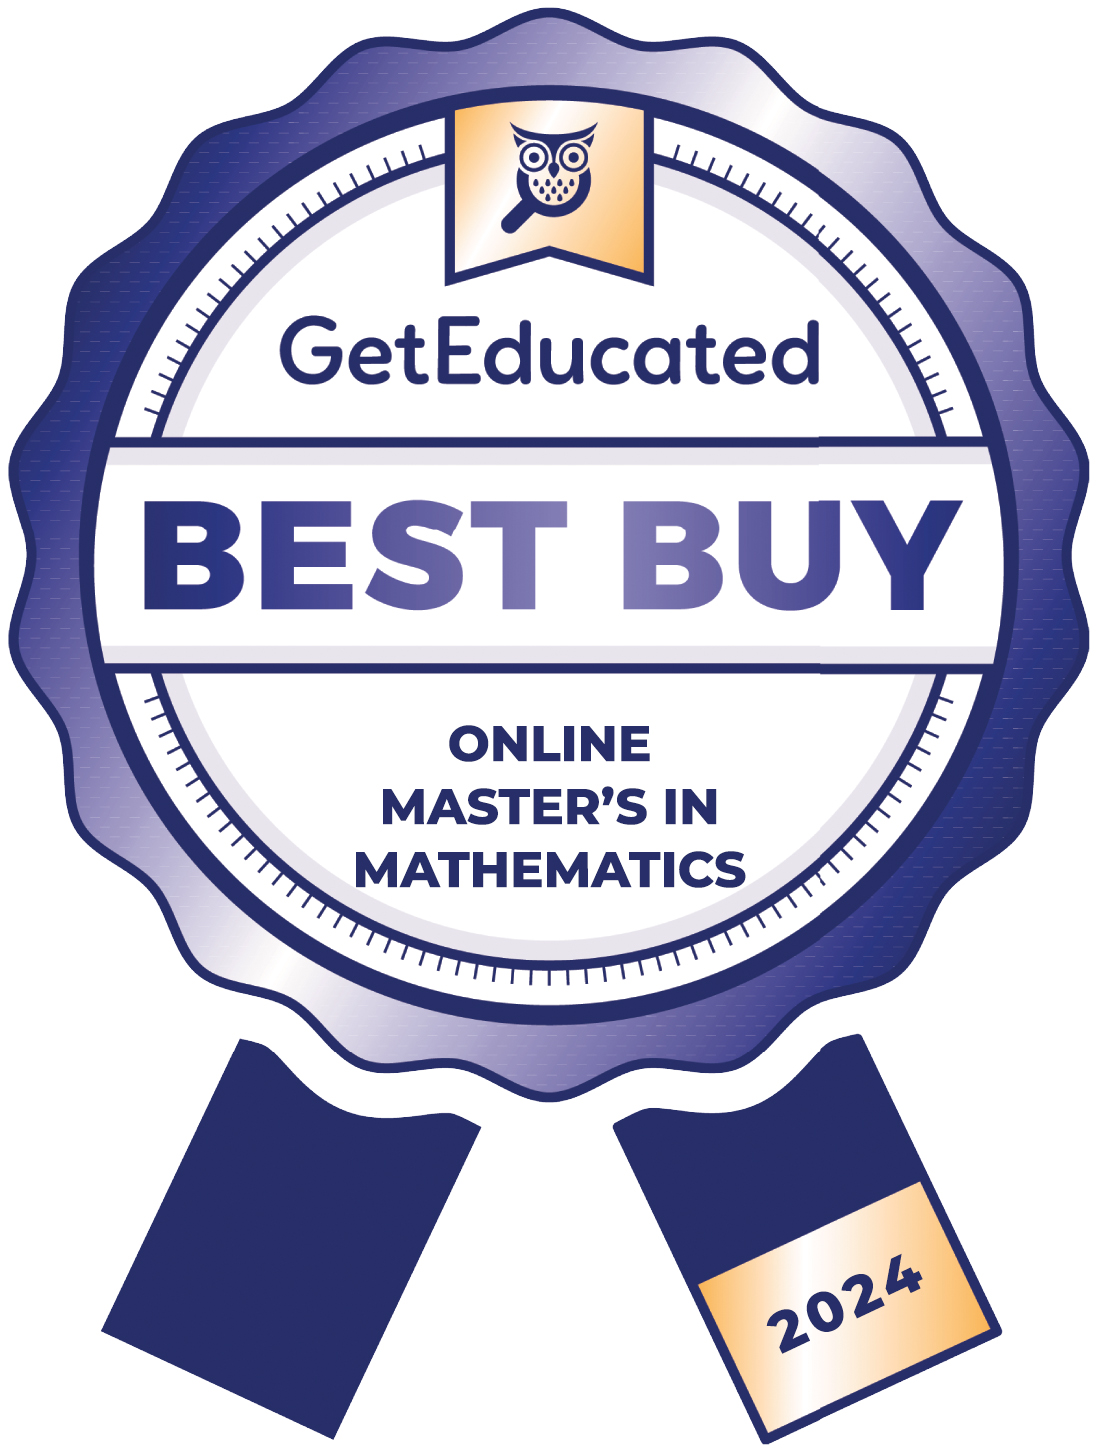 Rankings of the cheapest online master's in mathematics